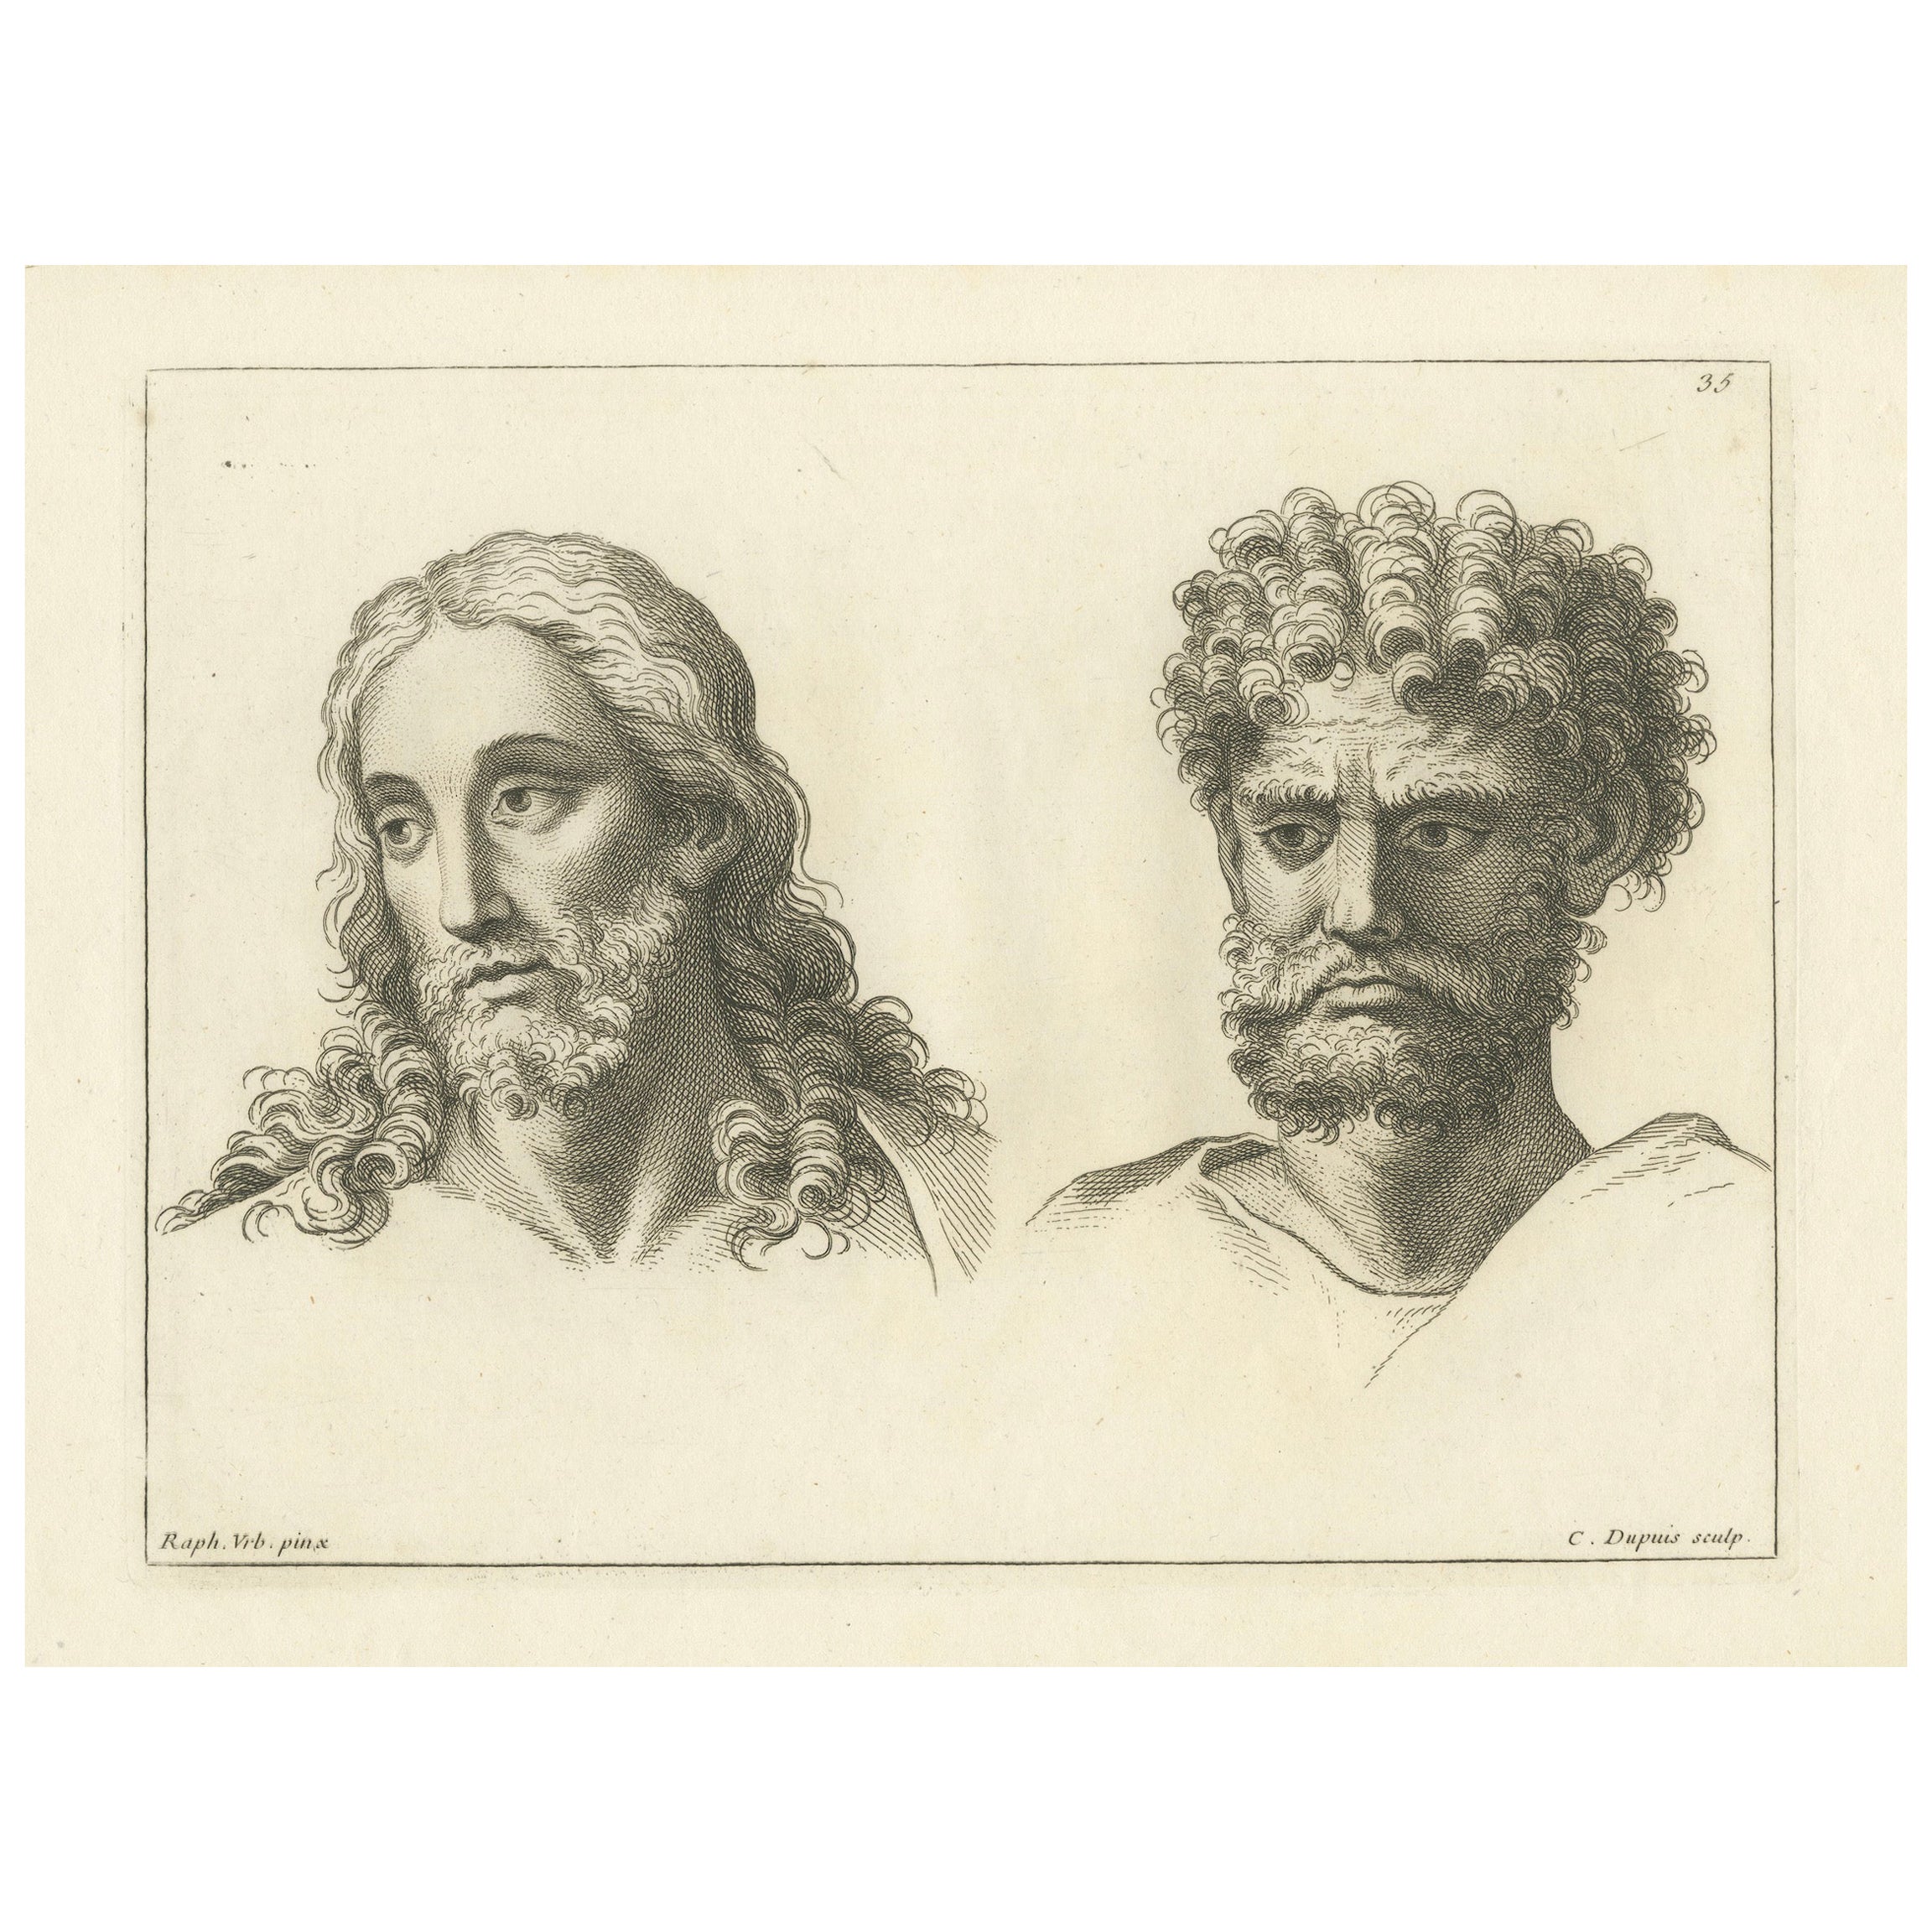 Serene and Stern: Dualities of Raphael by C. Dupuis, 1740